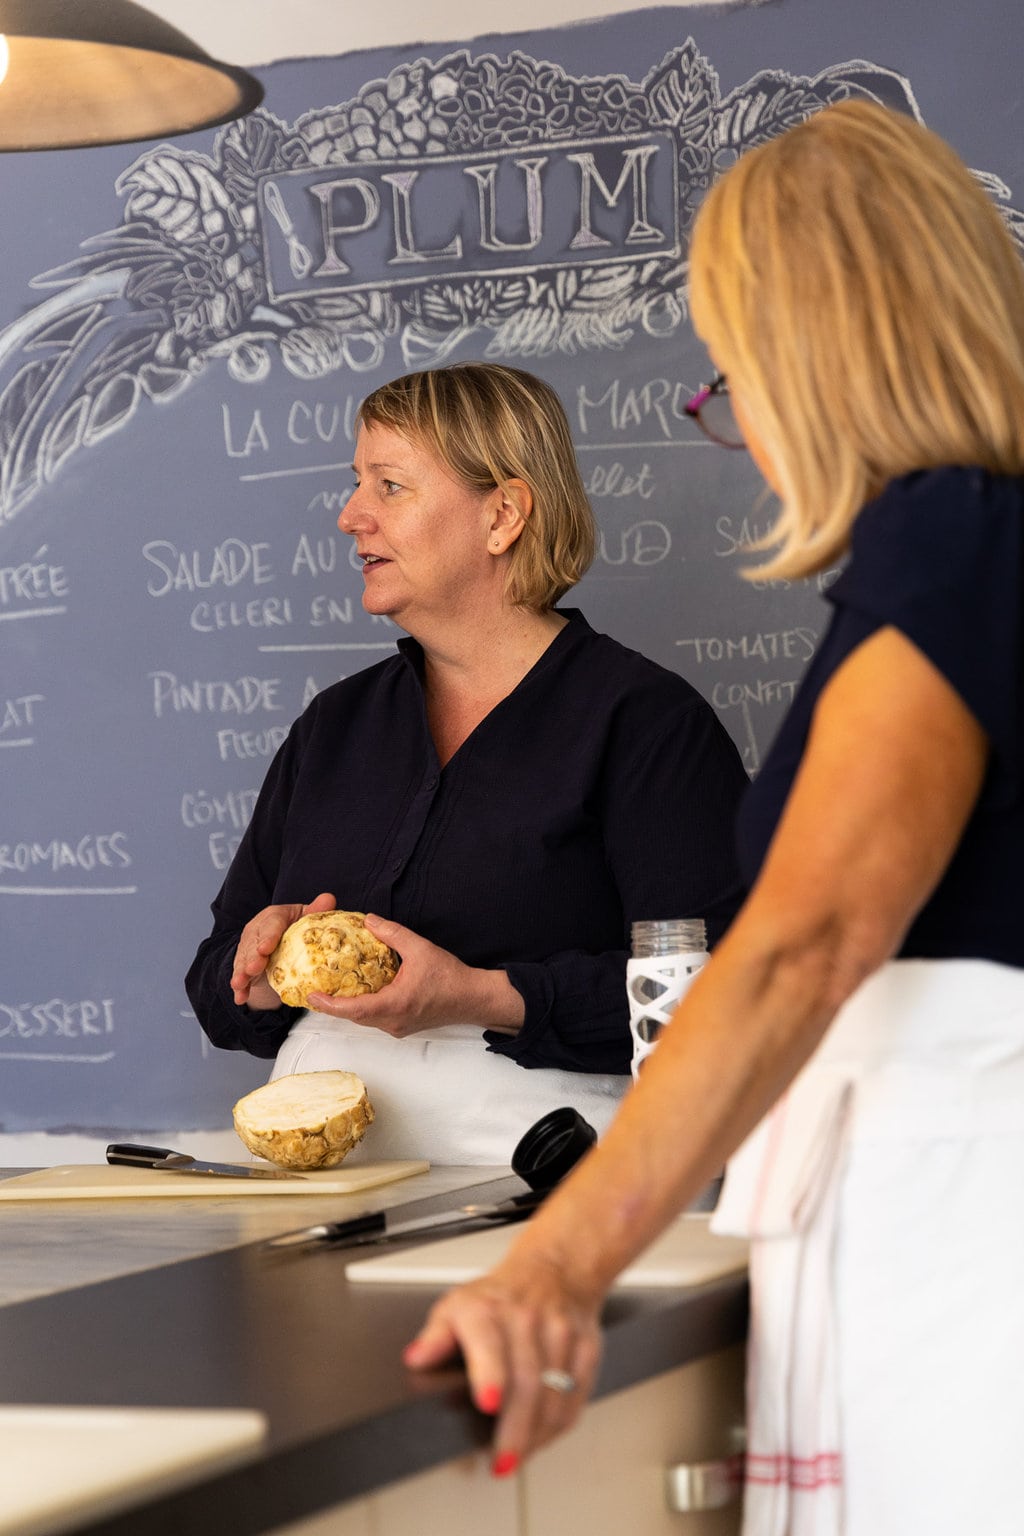 Vertical photo of Lucy teaching her students at Plum Cooking school in Lyon, France.